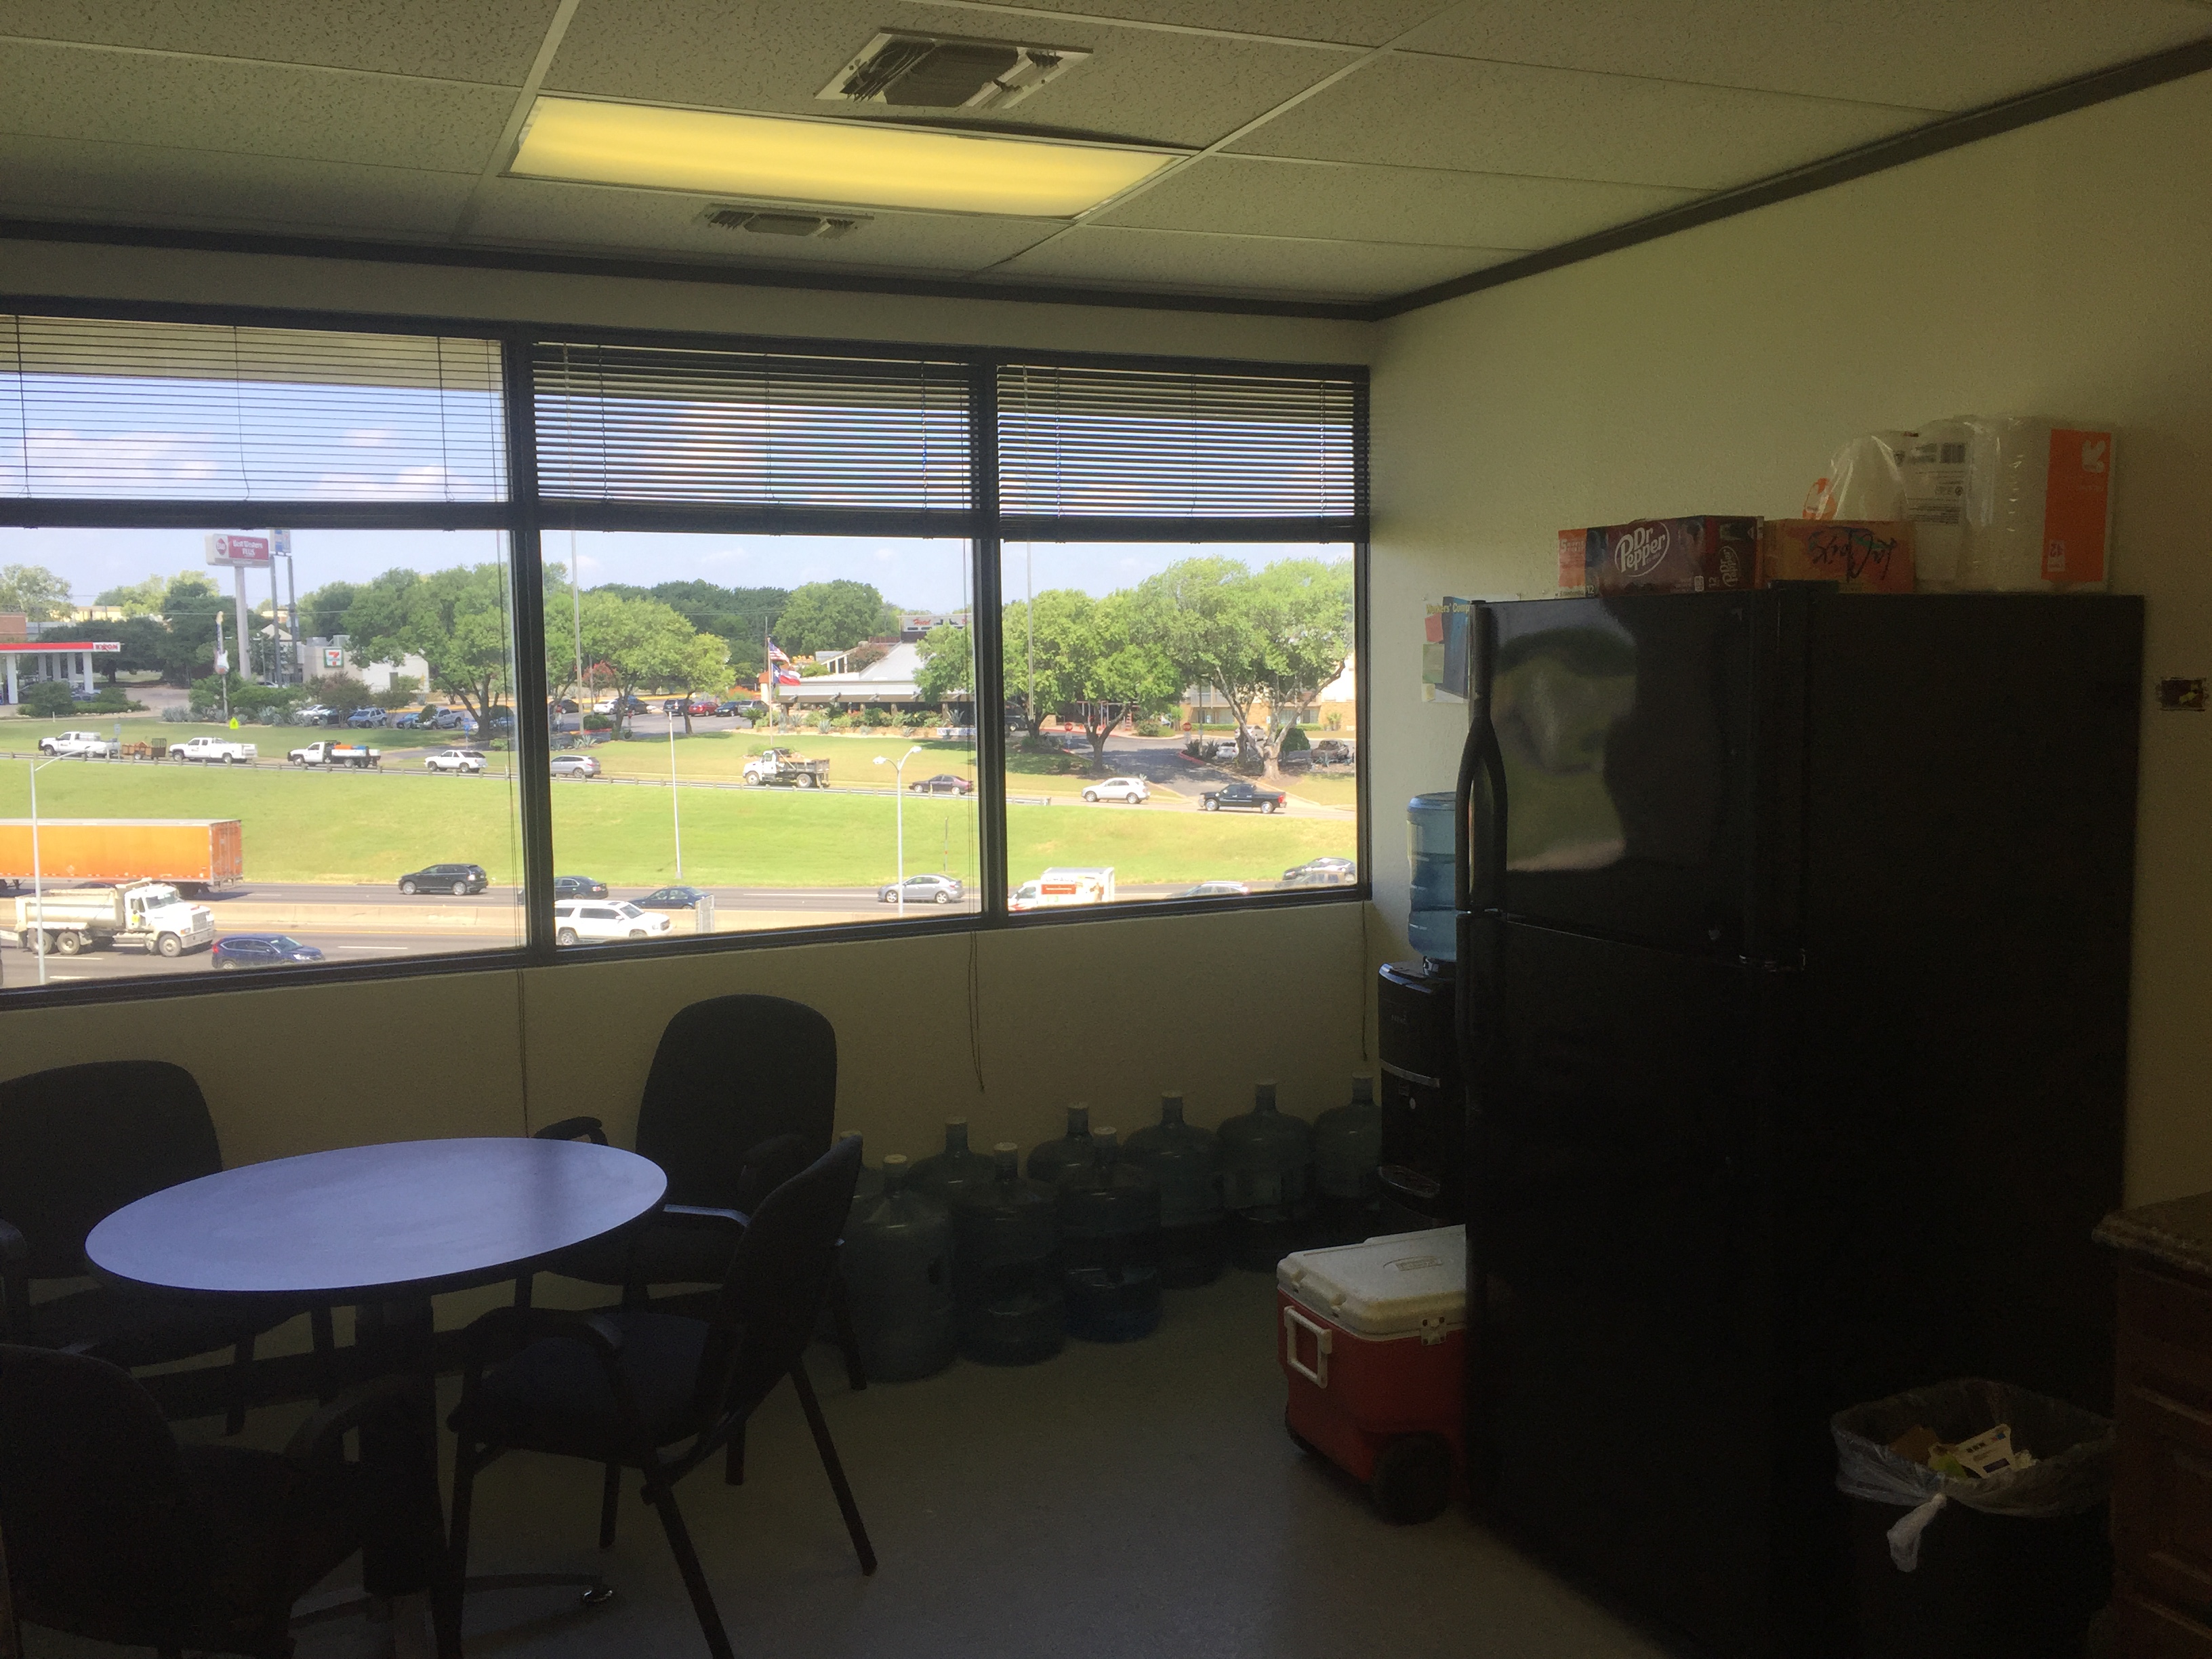 The new office in Austin, Texas, USA provides Gensuite team members with a larger break room.